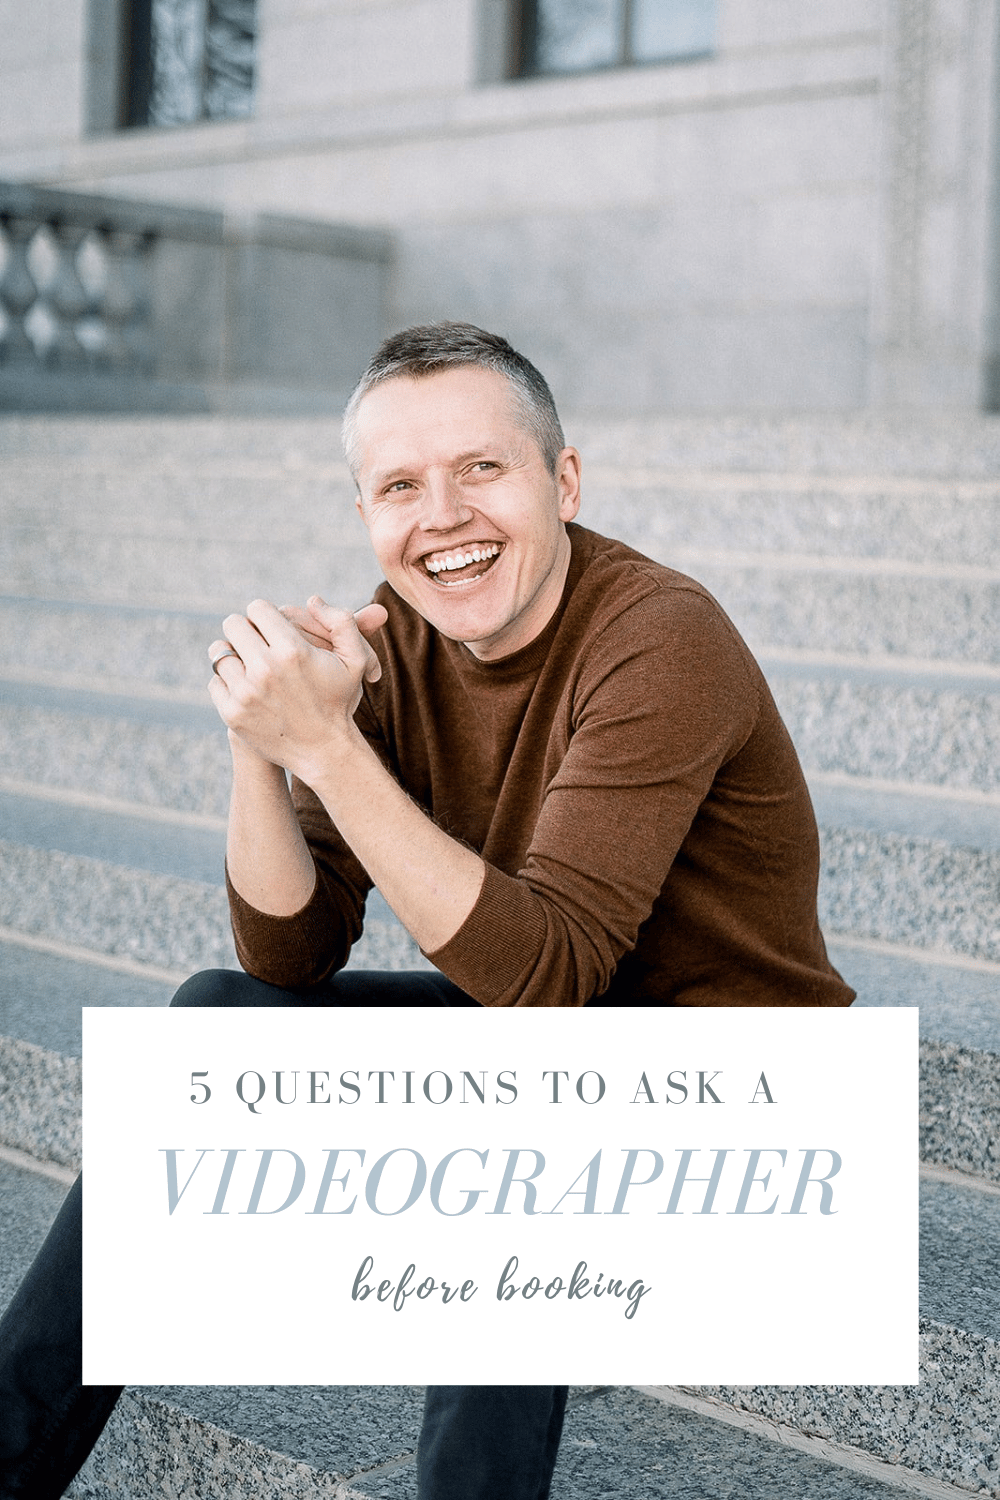 THE TOP 5 QUESTIONS TO ASK A VIDEOGRAPHER BEFORE BOOKING